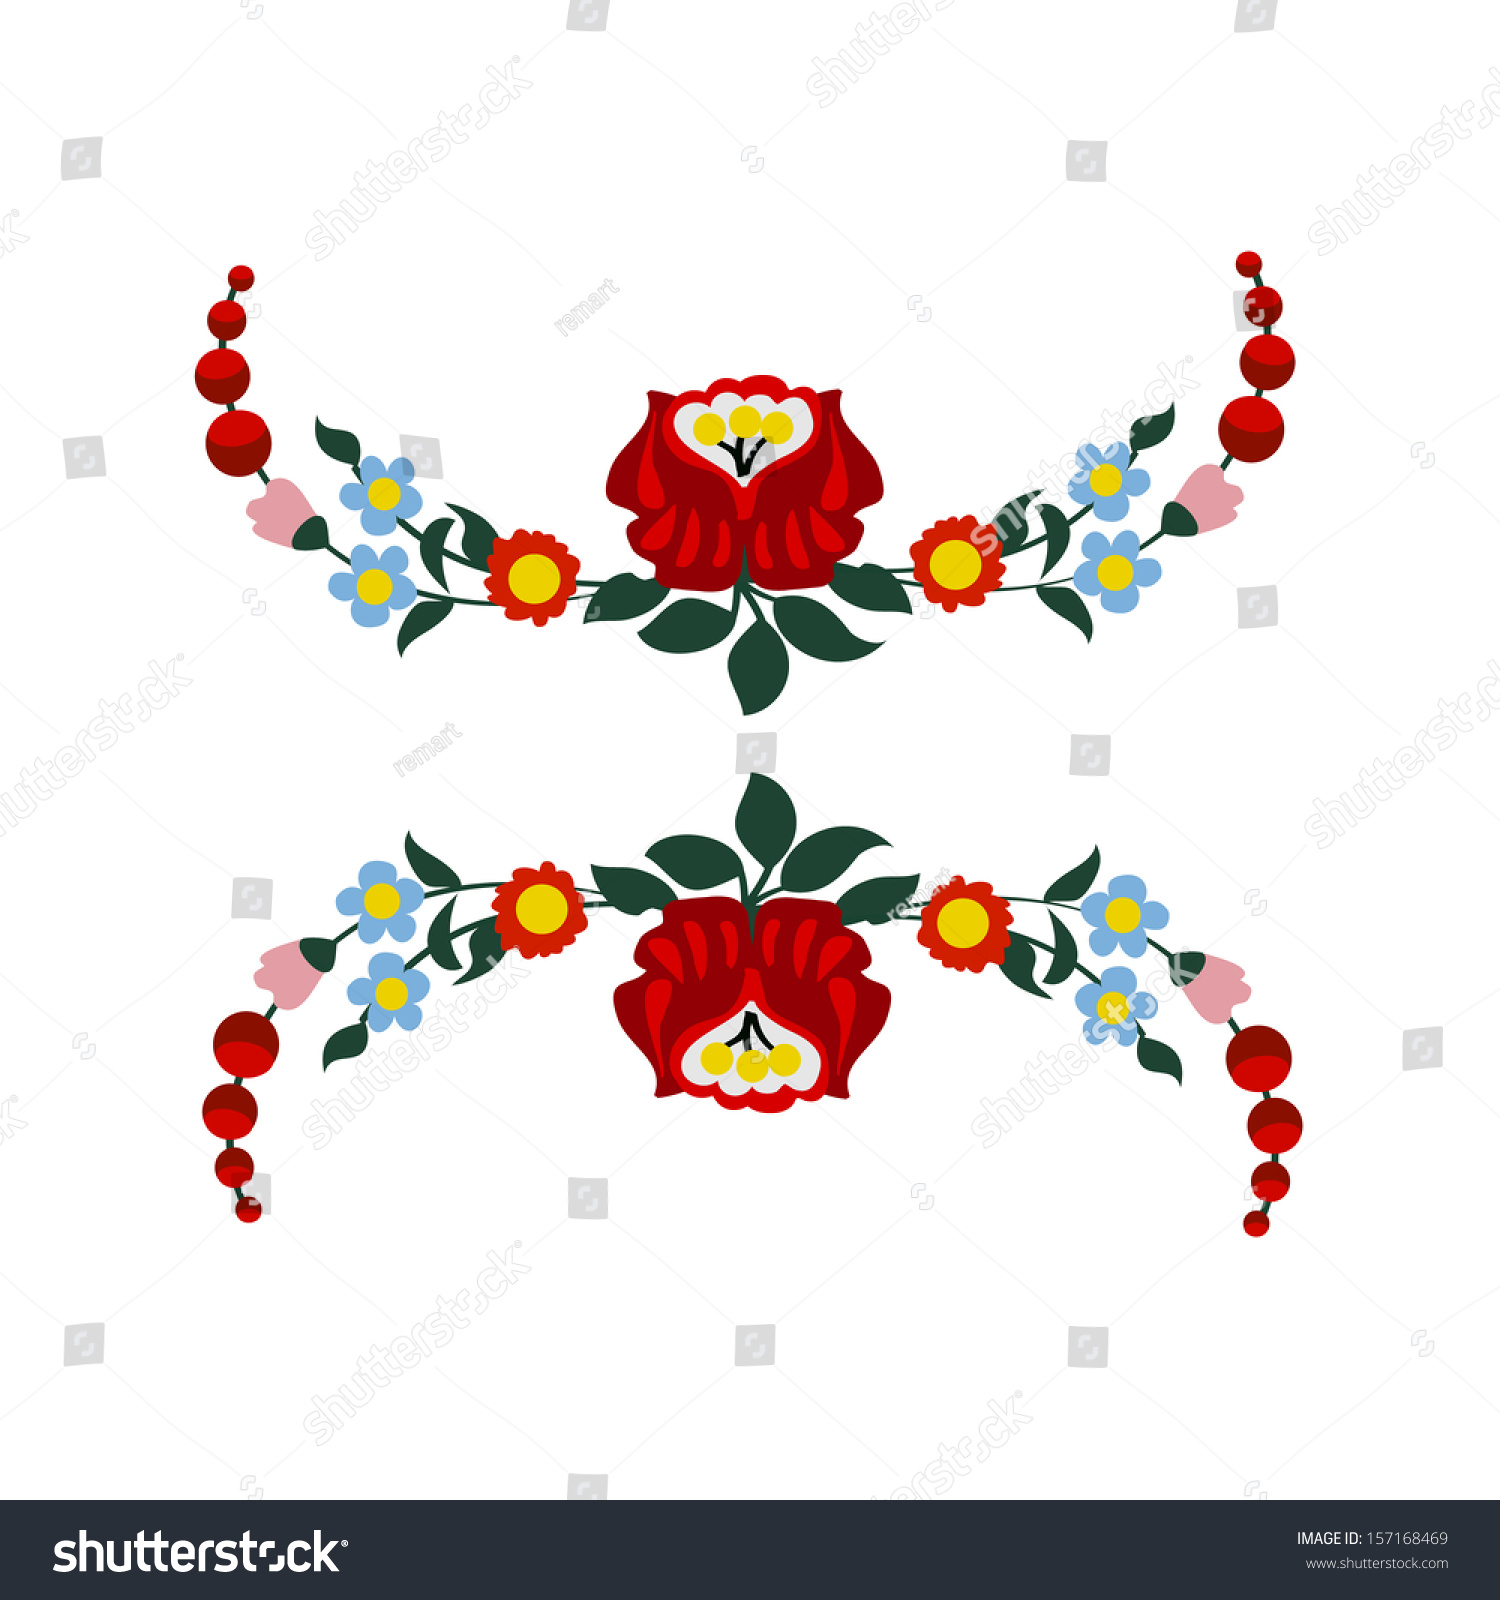 free vector embroidery clipart - photo #36